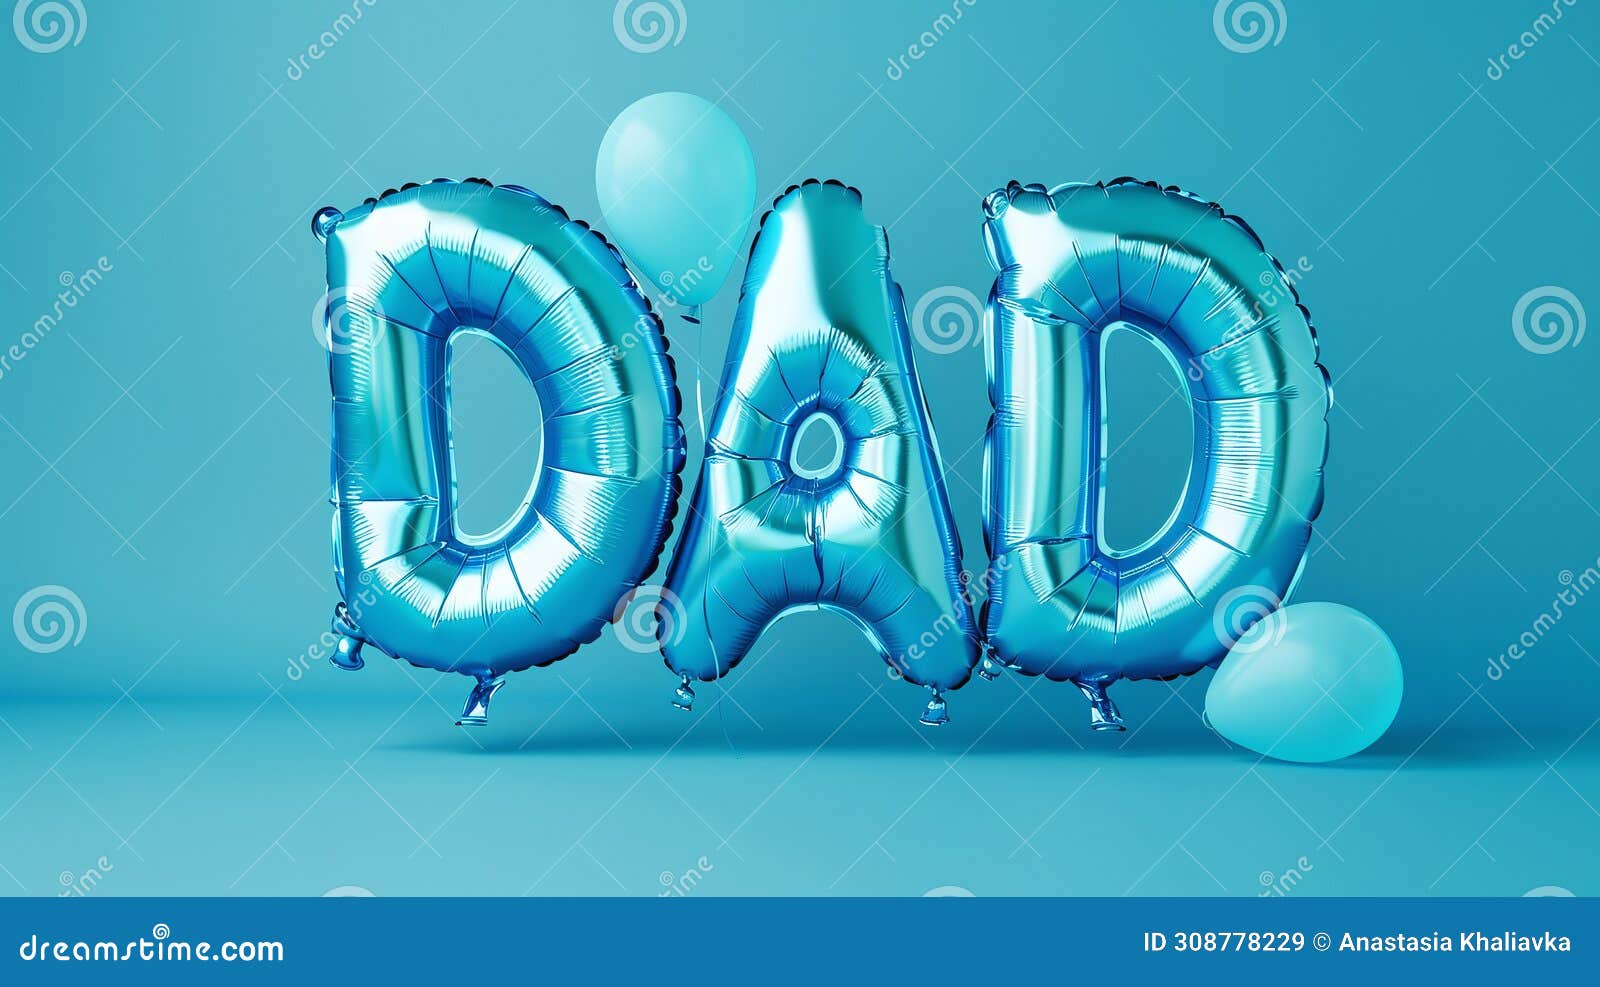 happy father's day. greeting cards, the word dad from blue balloons on a blue one-tone background